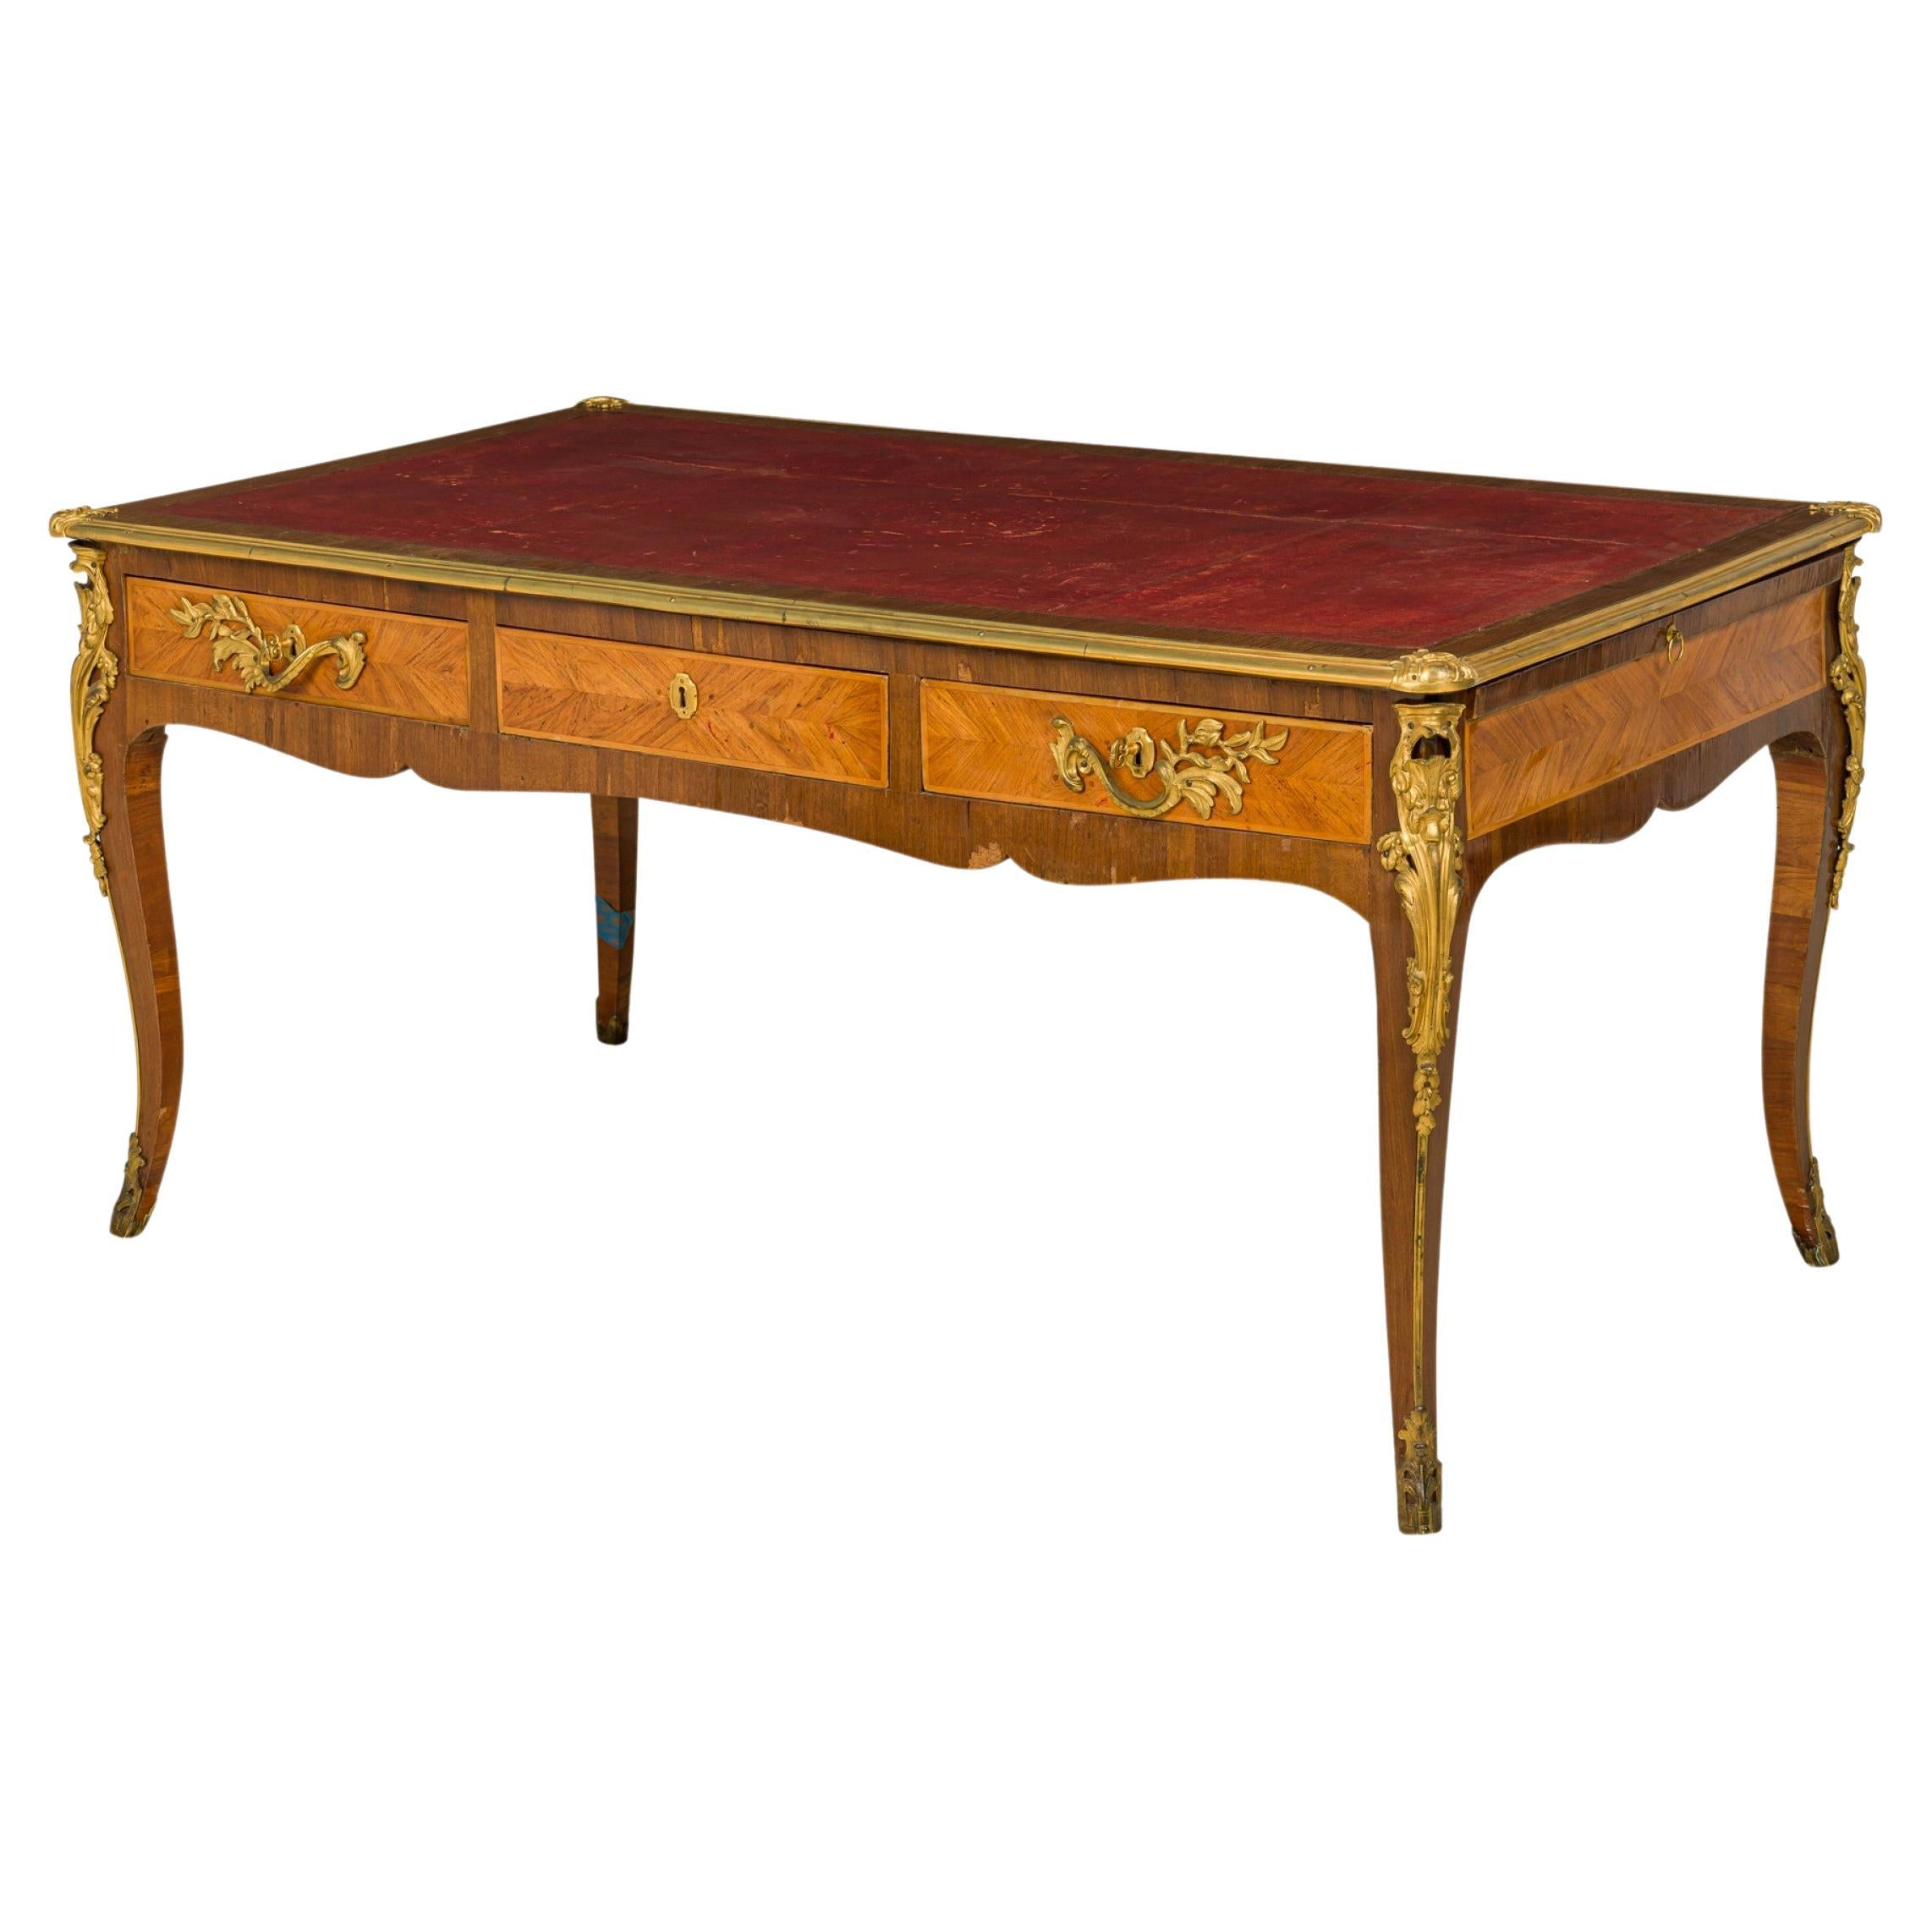 French Louis XVI Kingwood Veneer, Ormolu, and Red Leather Writing Desk For Sale